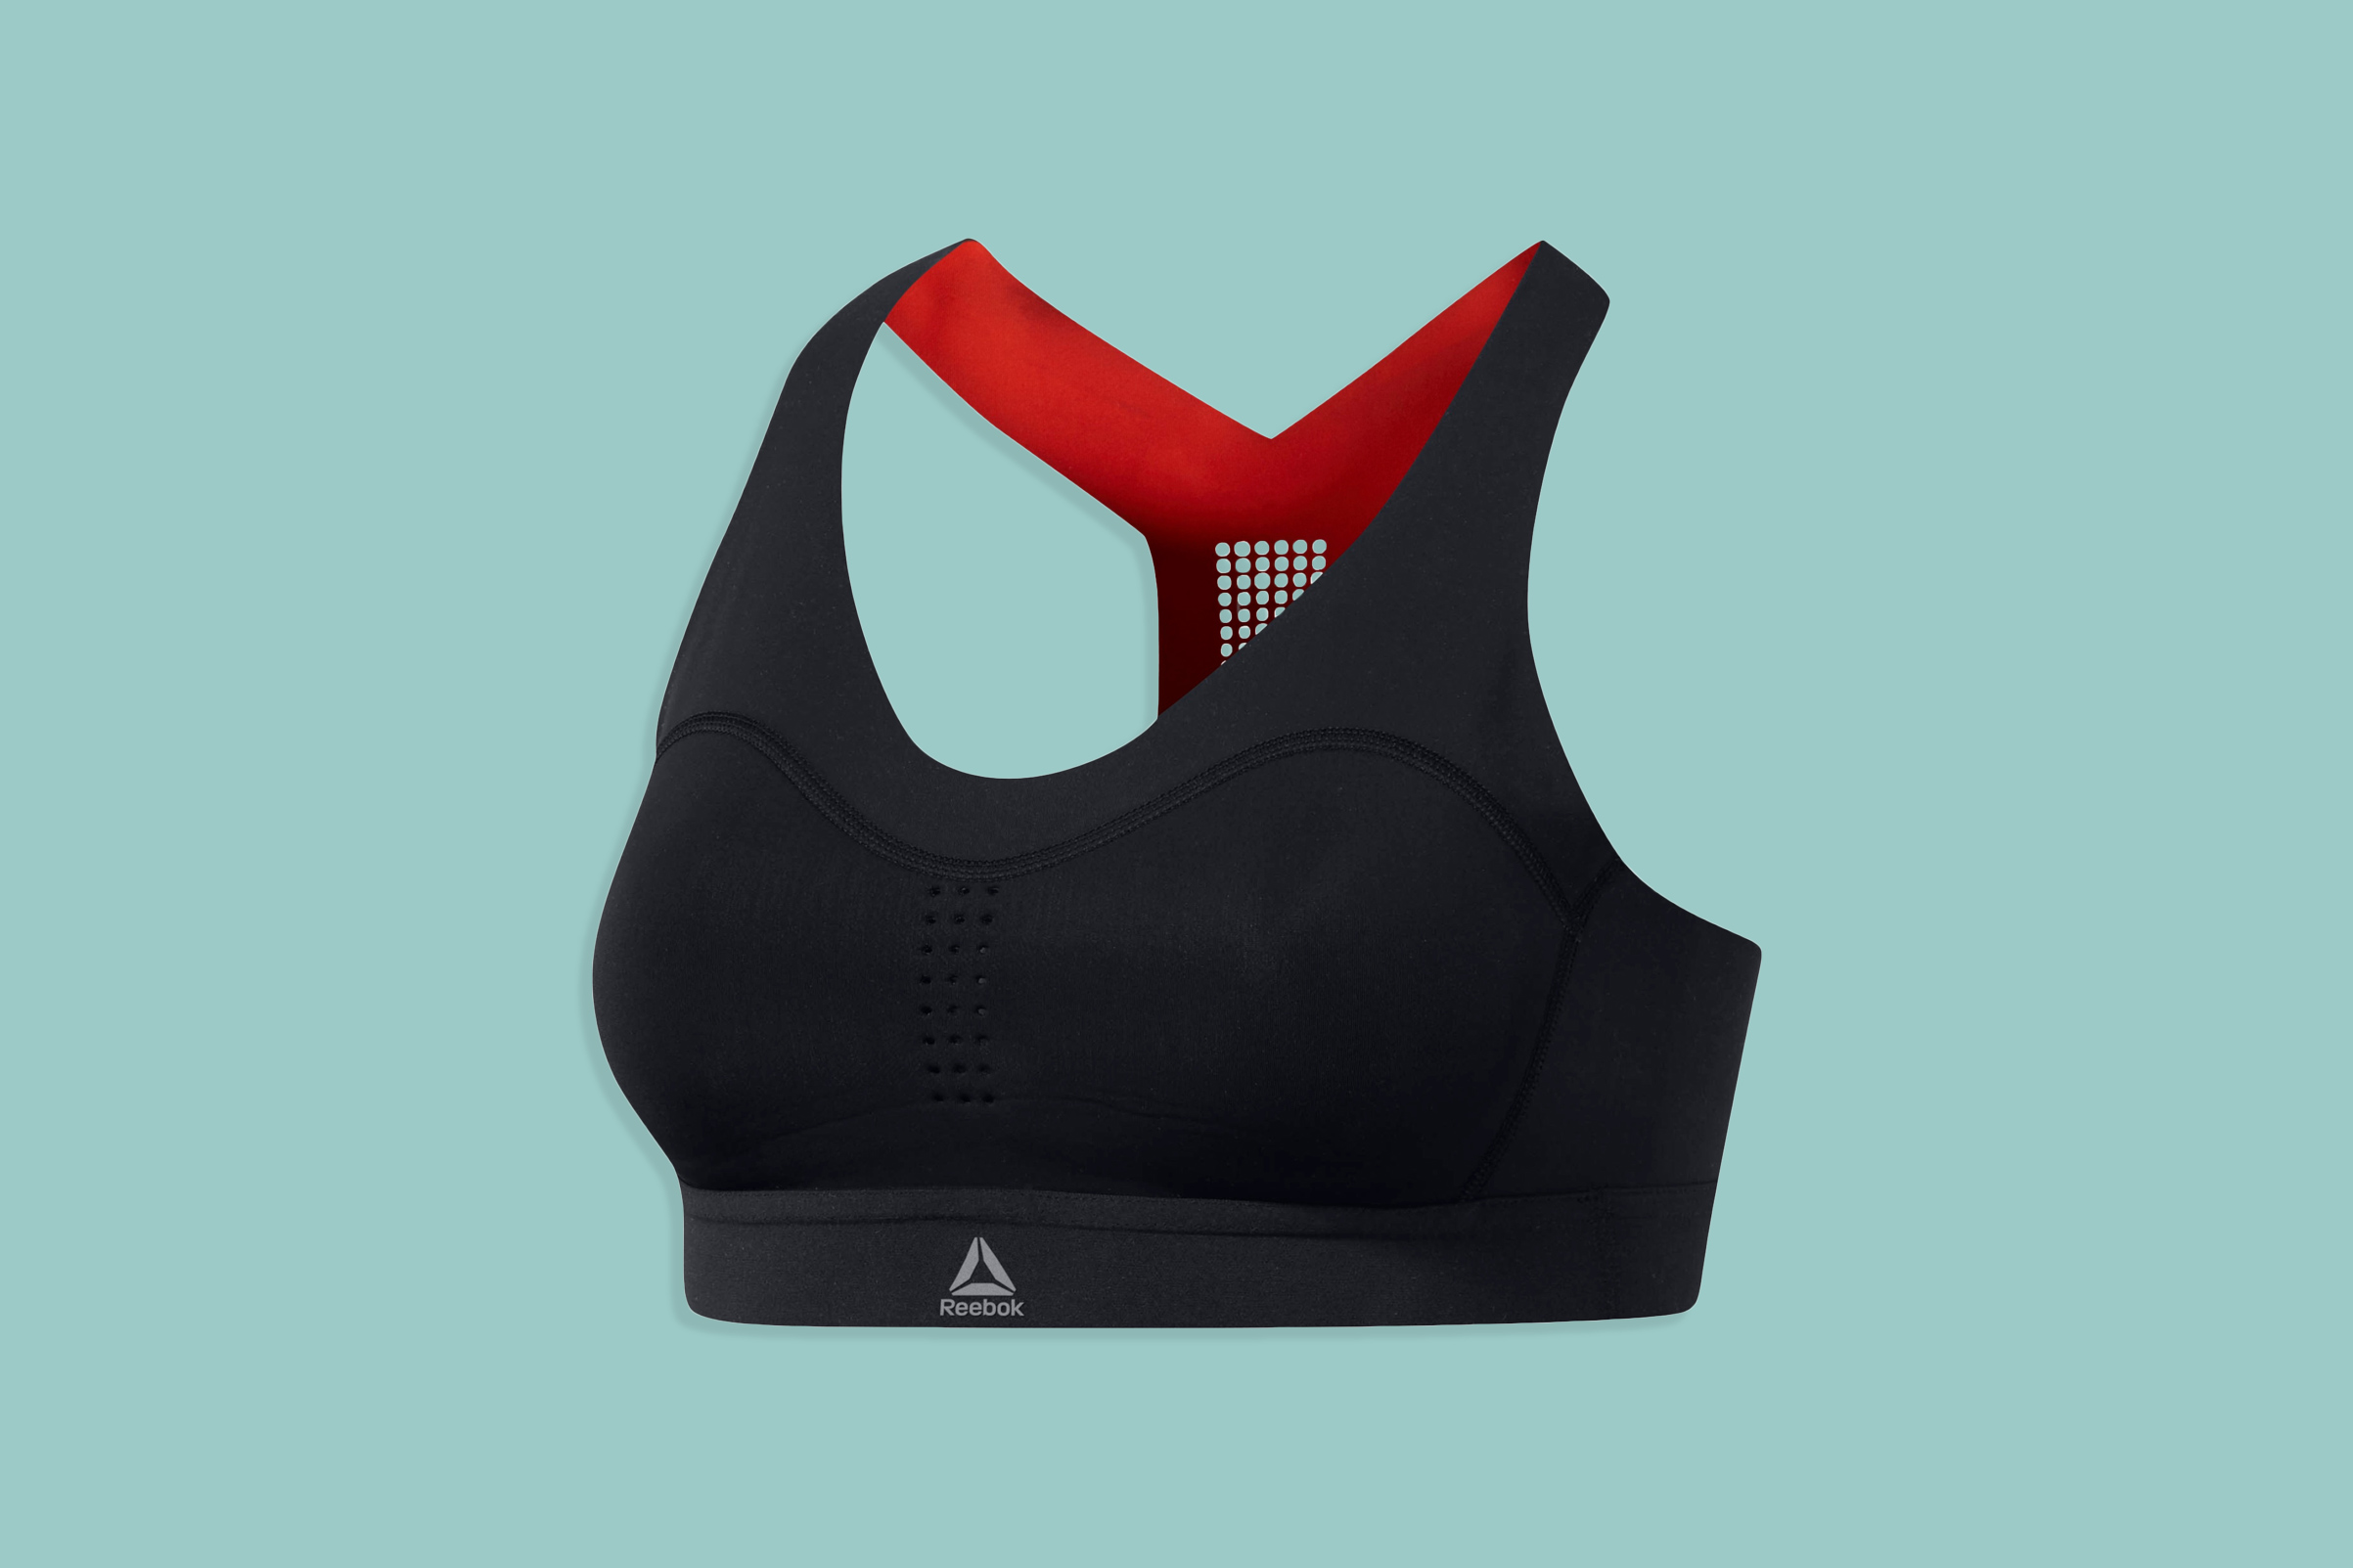 Reebok PureMove Is One of TIME's Best Inventions of 2018